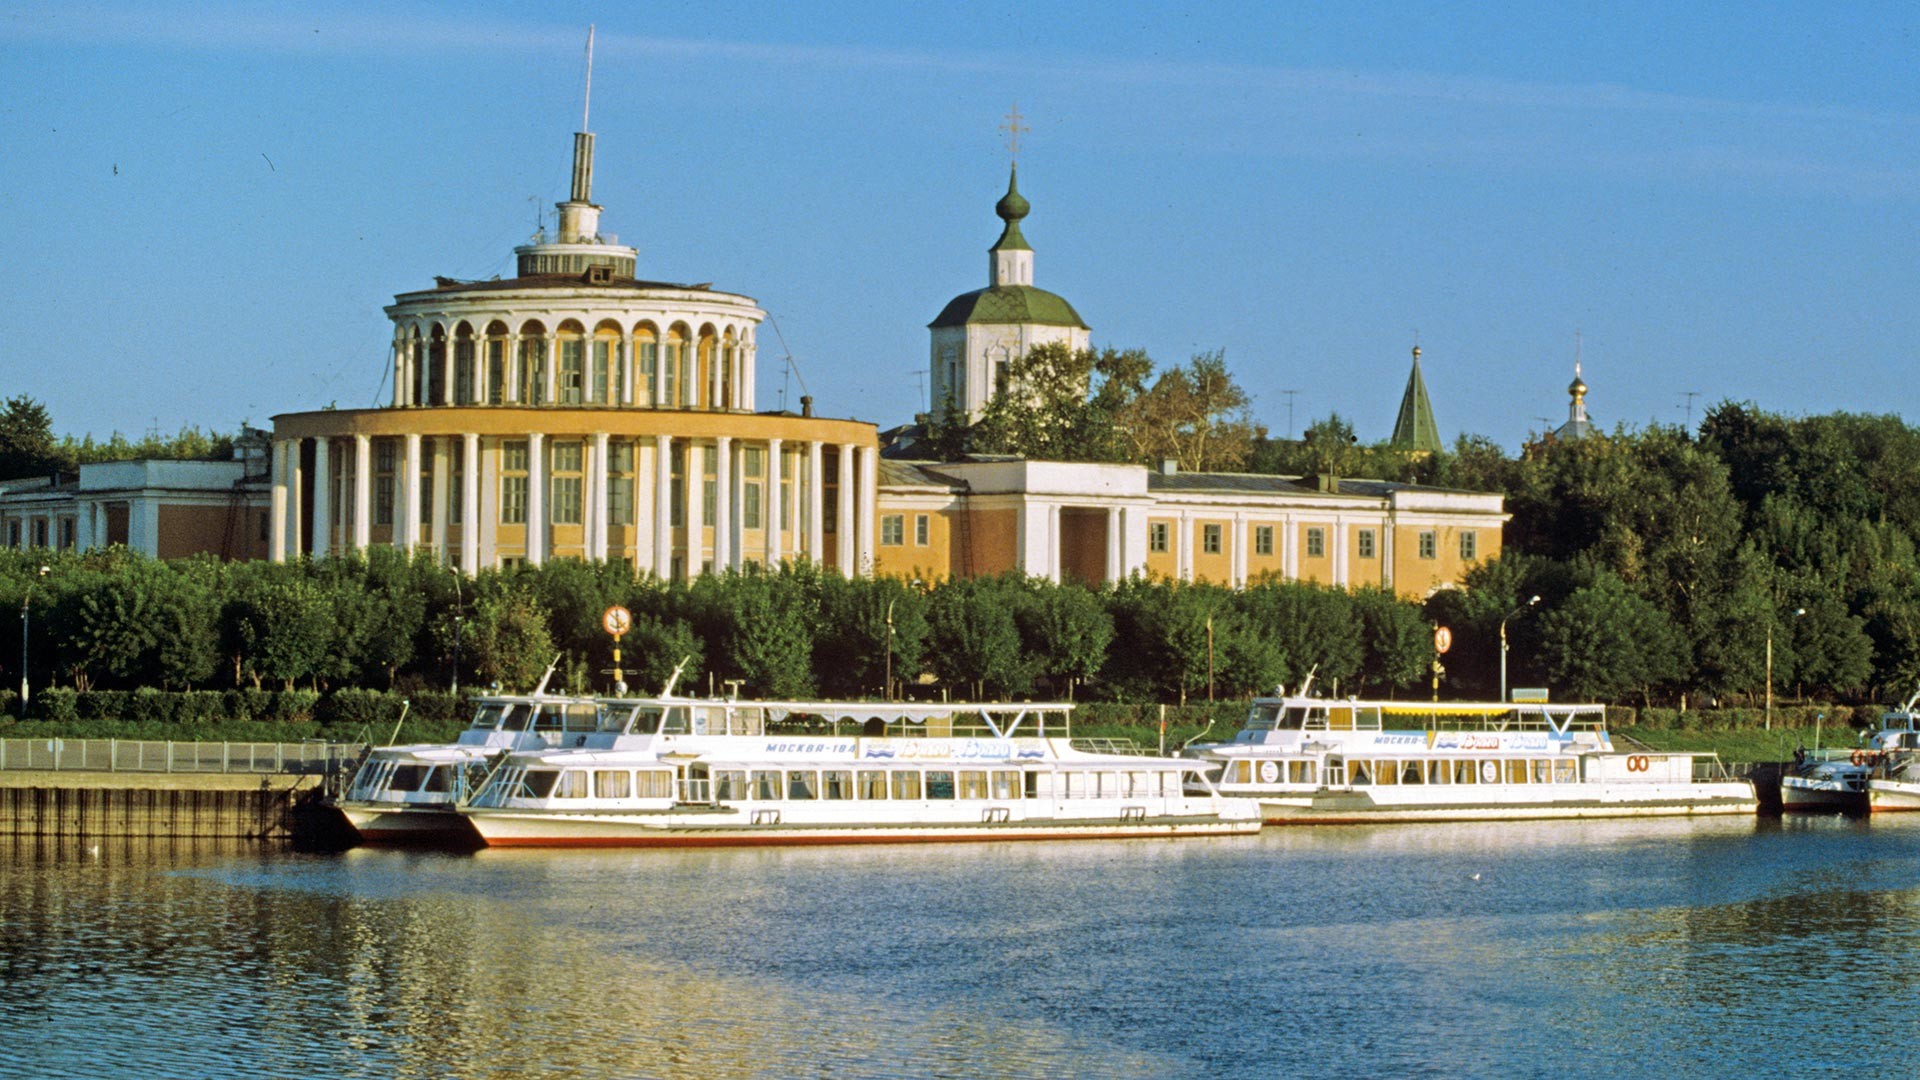 A river terminal in Tver, 1990s.